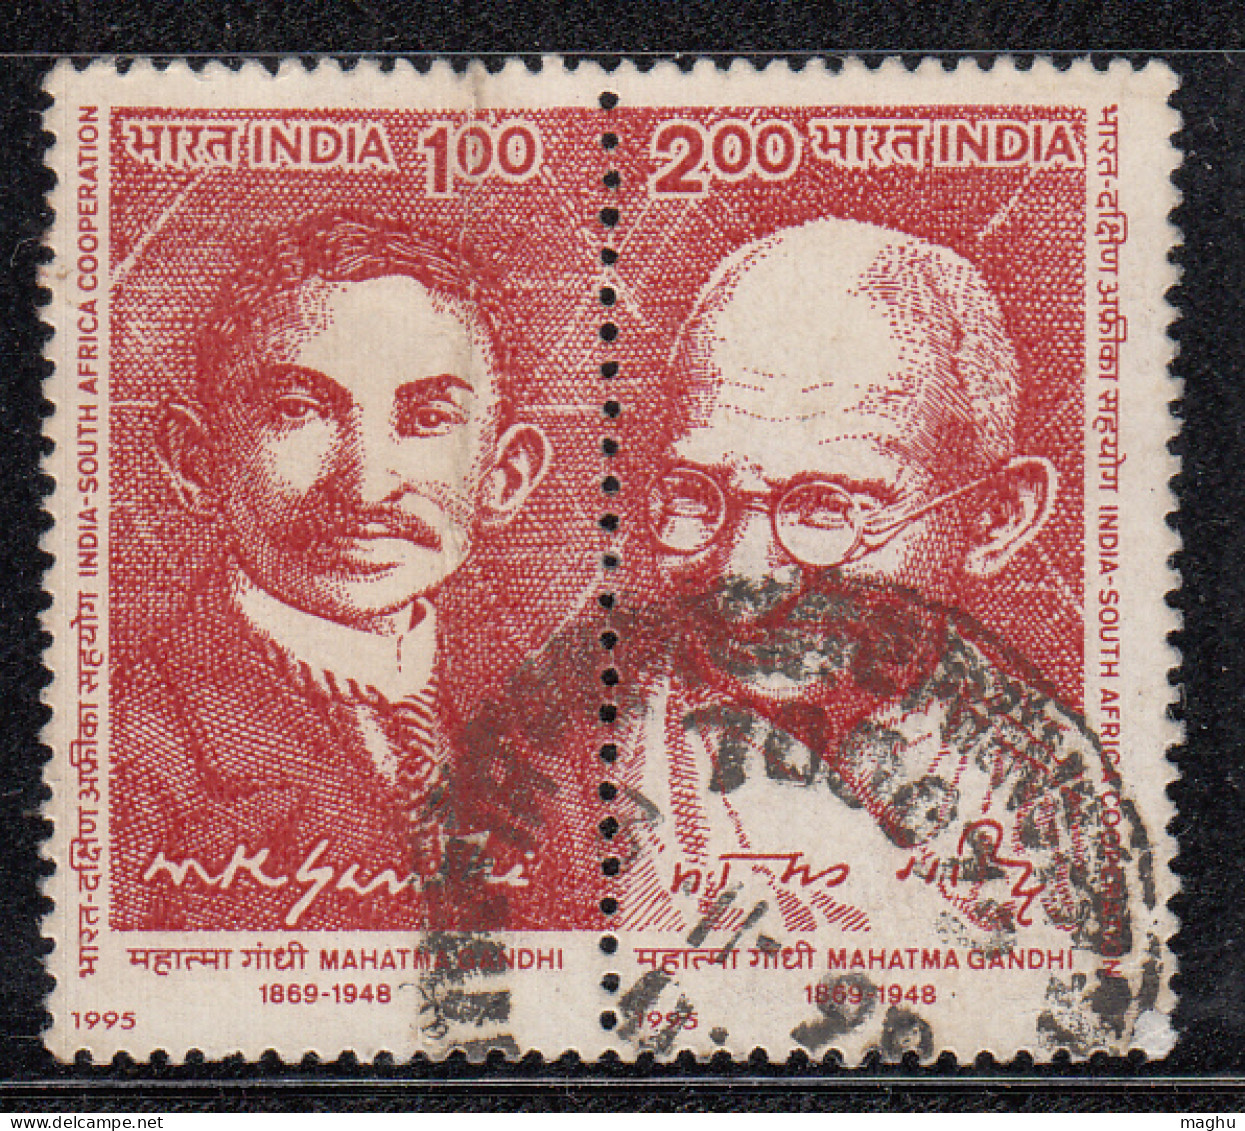 Se-tenent Used India 1995, South Africa Conference, Gandhi As Young Barrister And Old Age, - Used Stamps